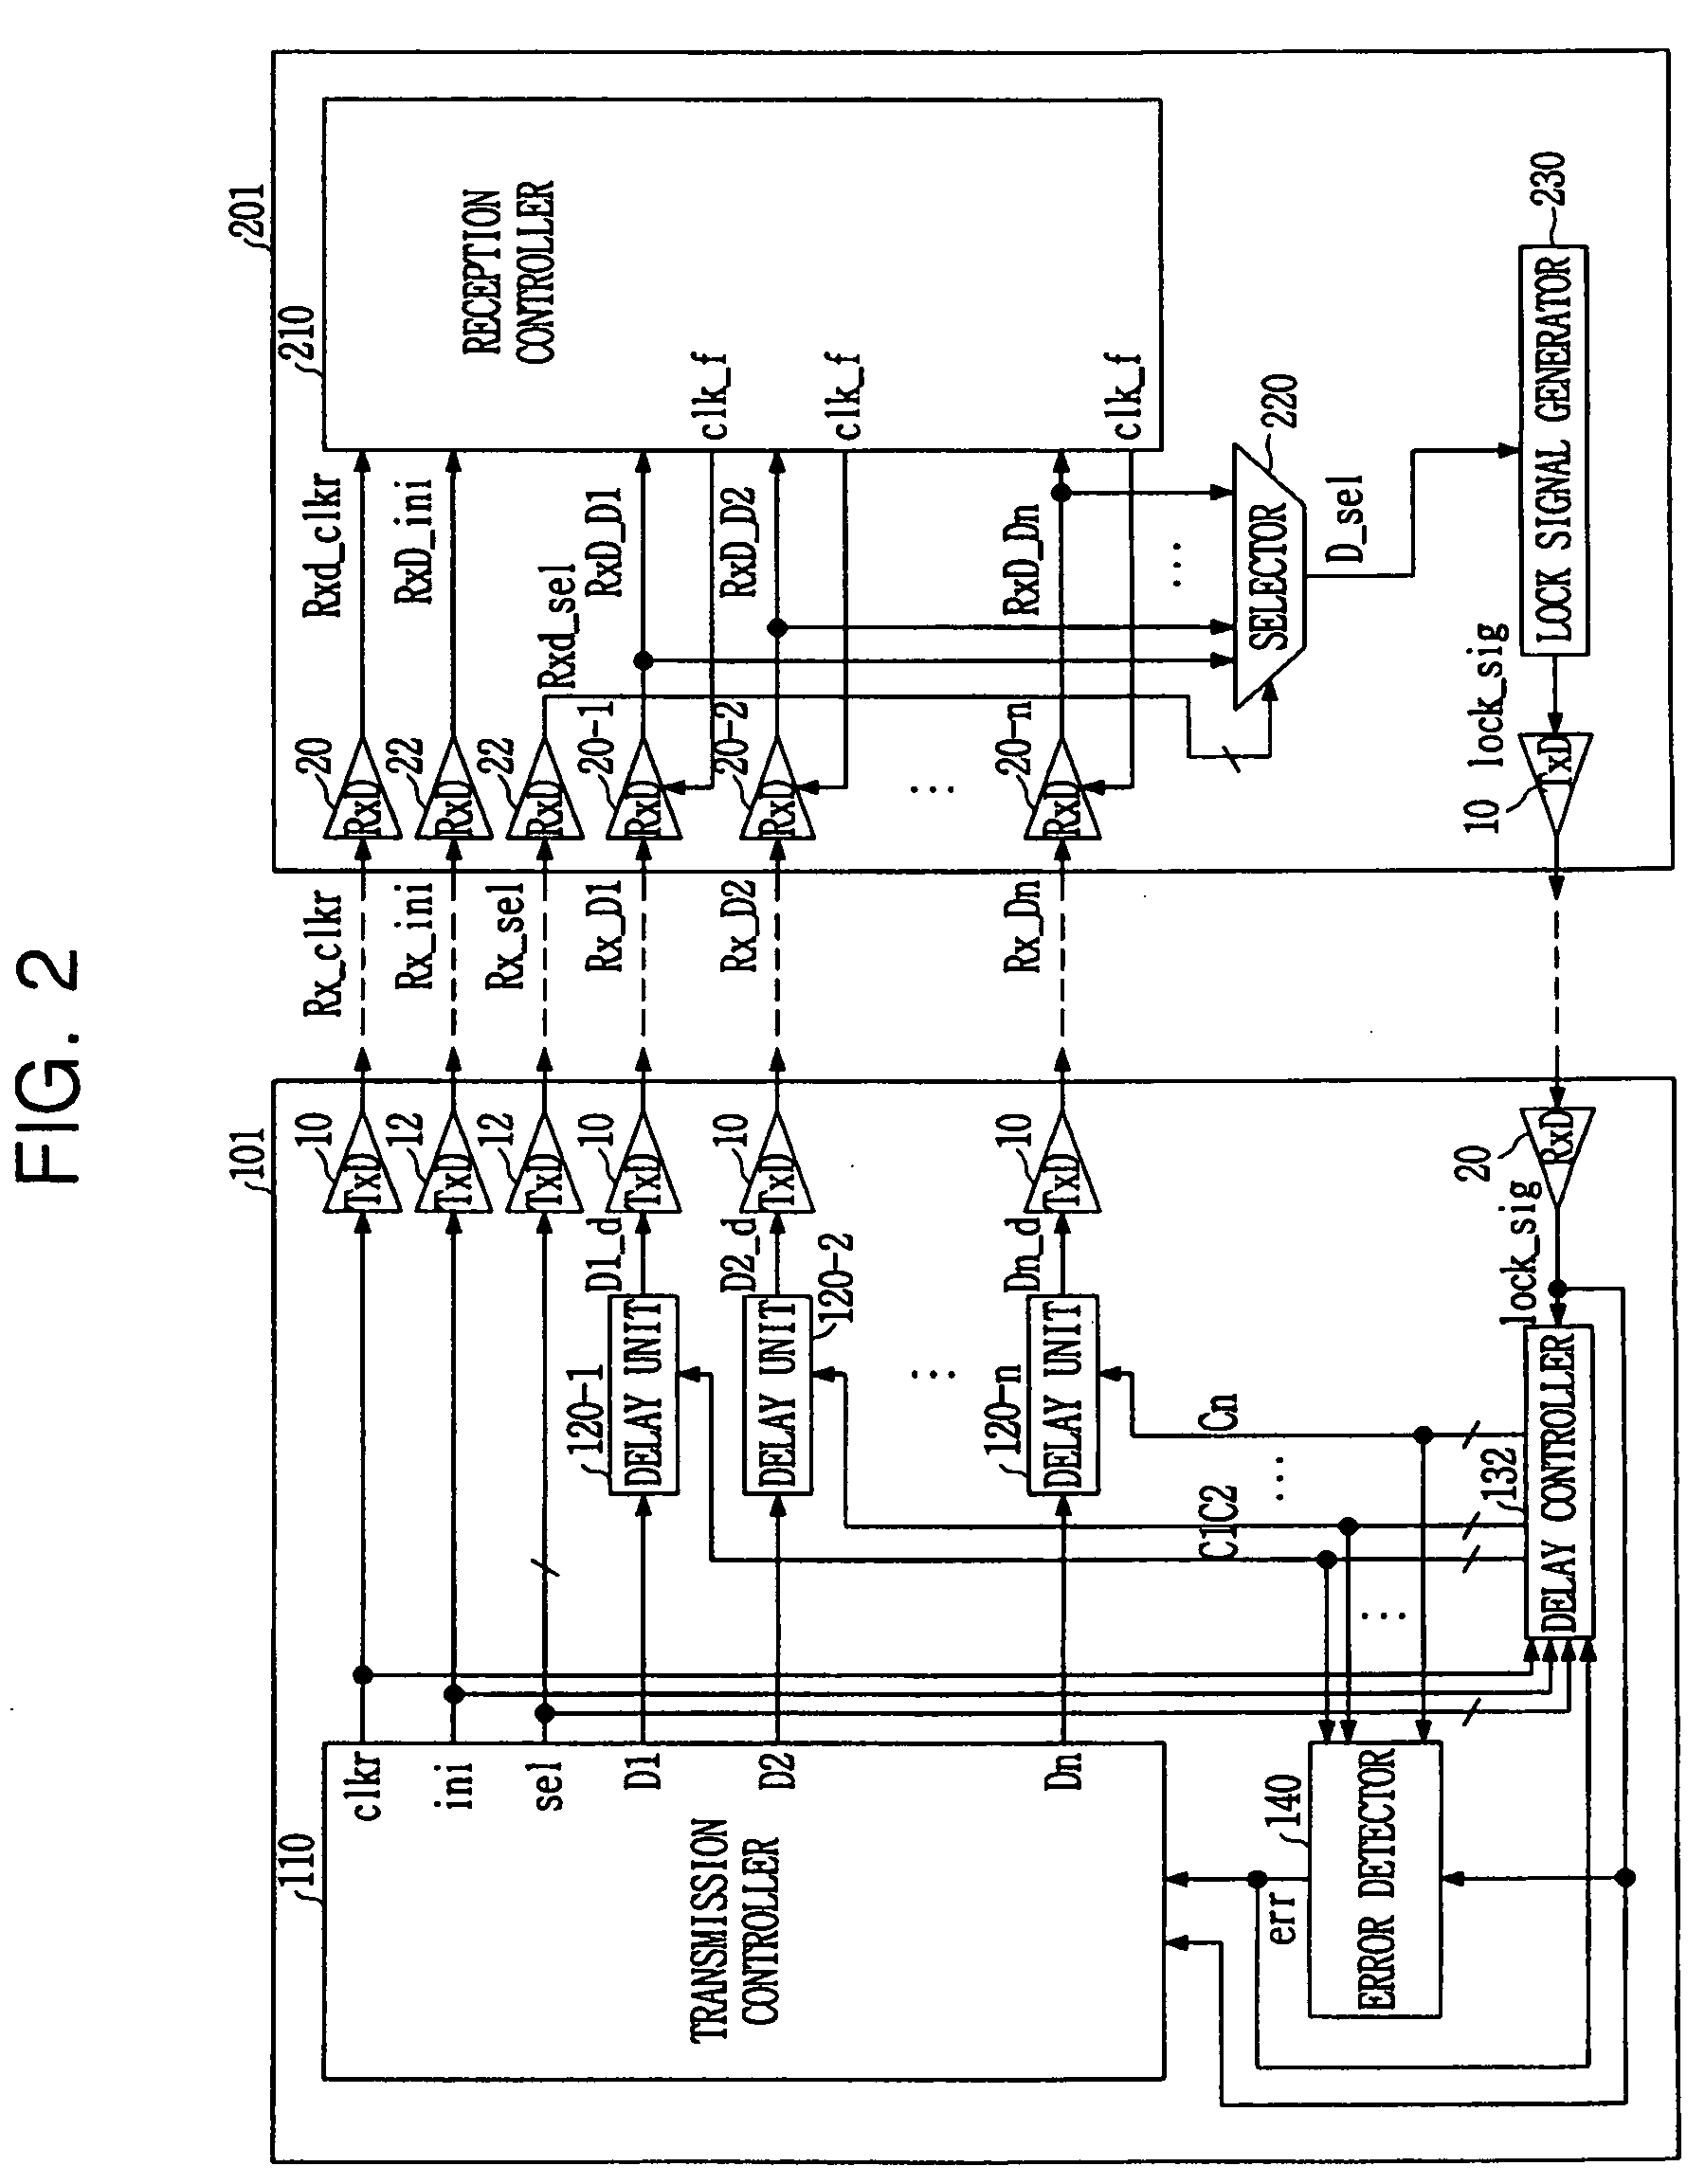 Data transceiver system and associated methods